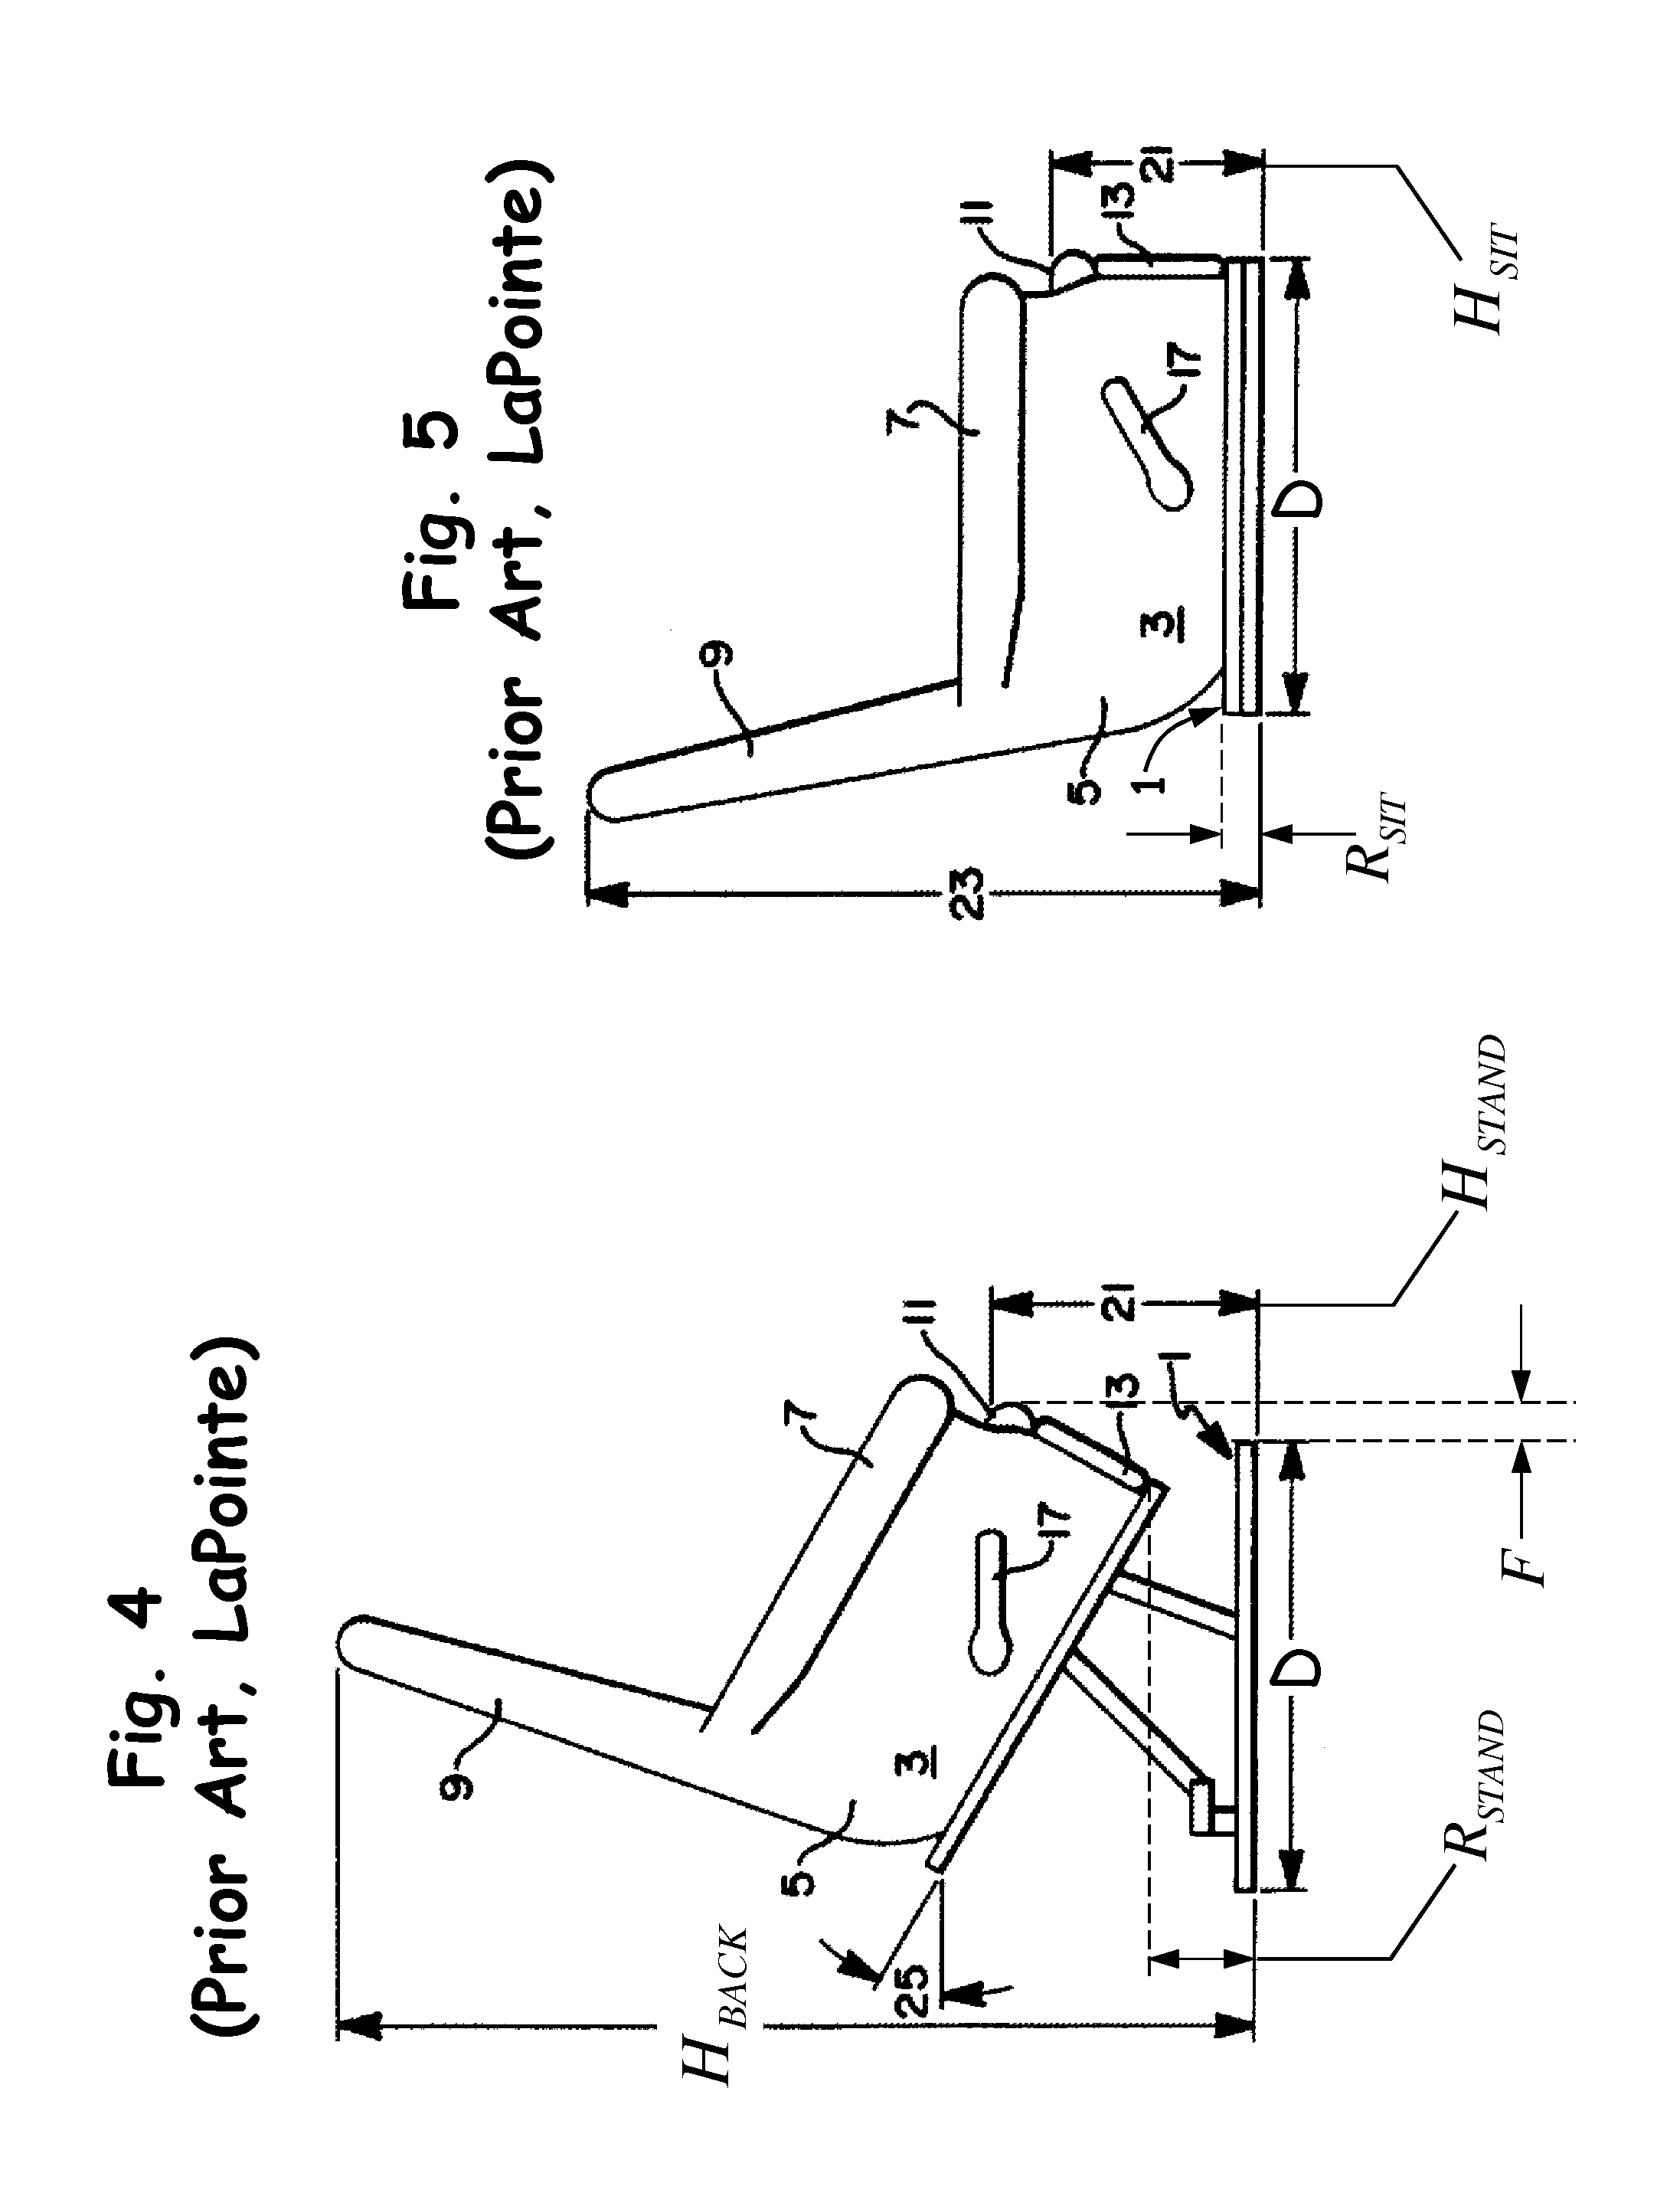 Apparatus for lifting a chair